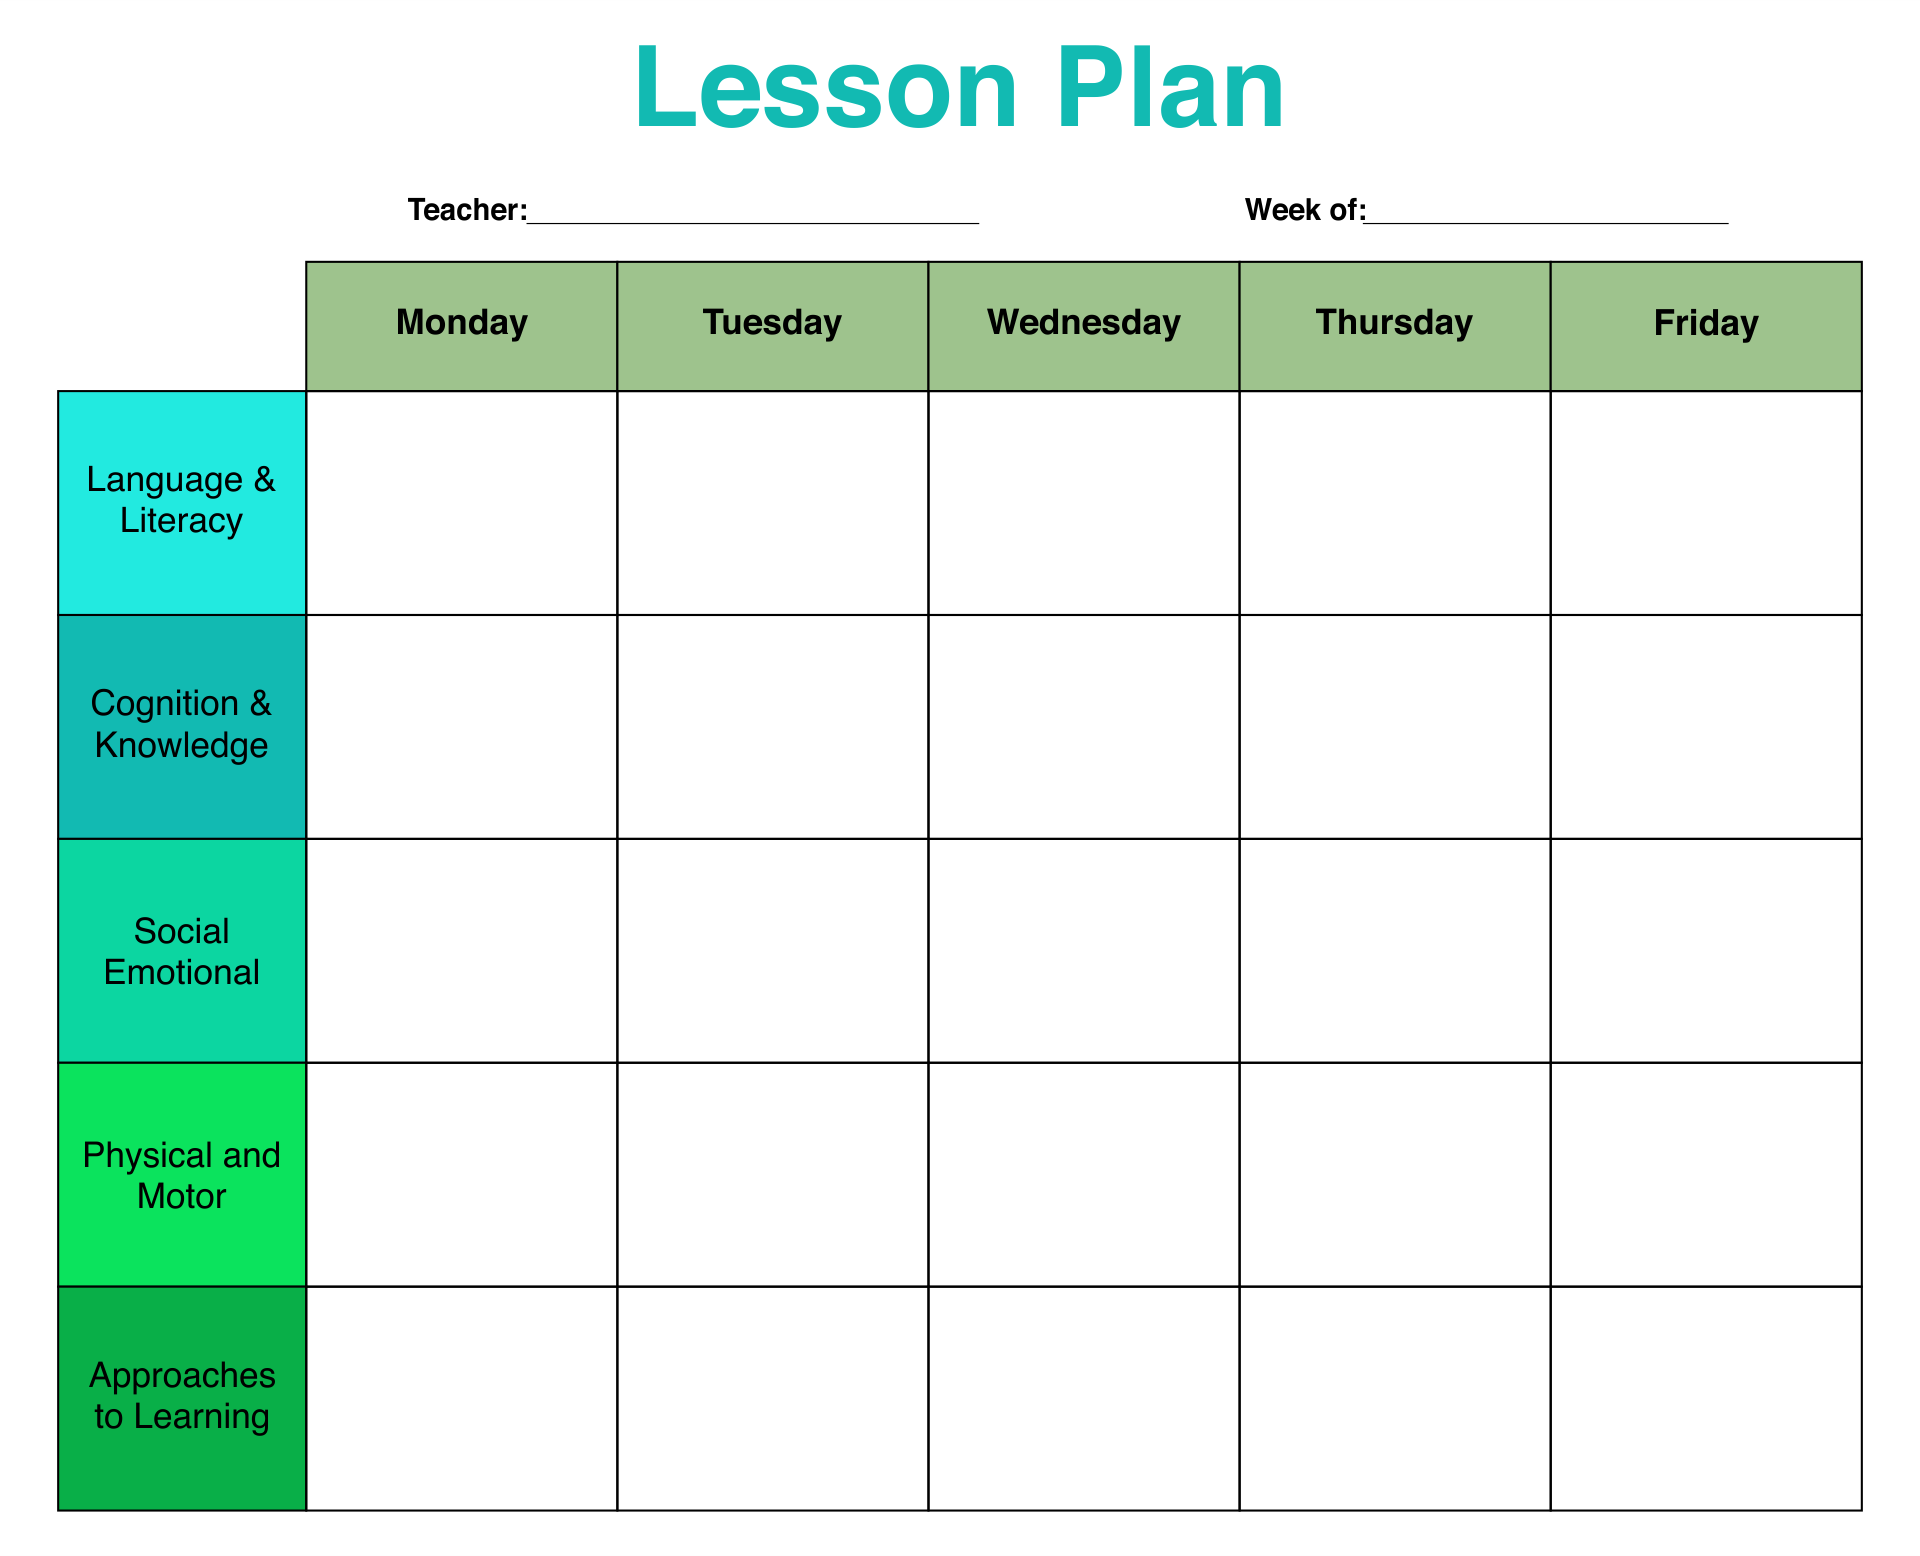 Toddler Lesson Plan Template Free